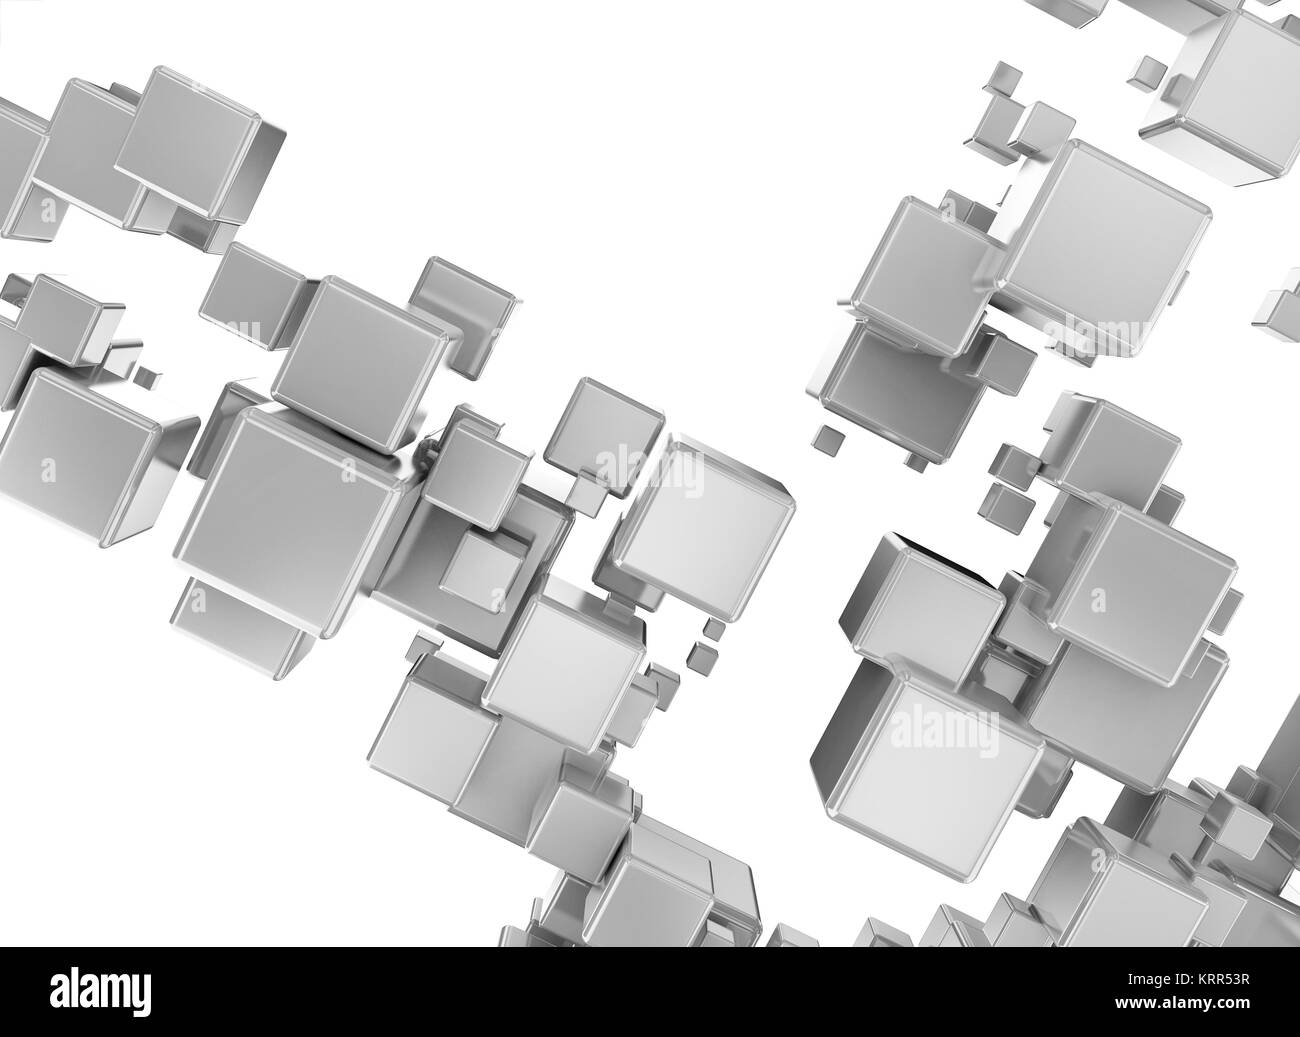 Abstract 3d digital cubes isolated on white background Stock Photo